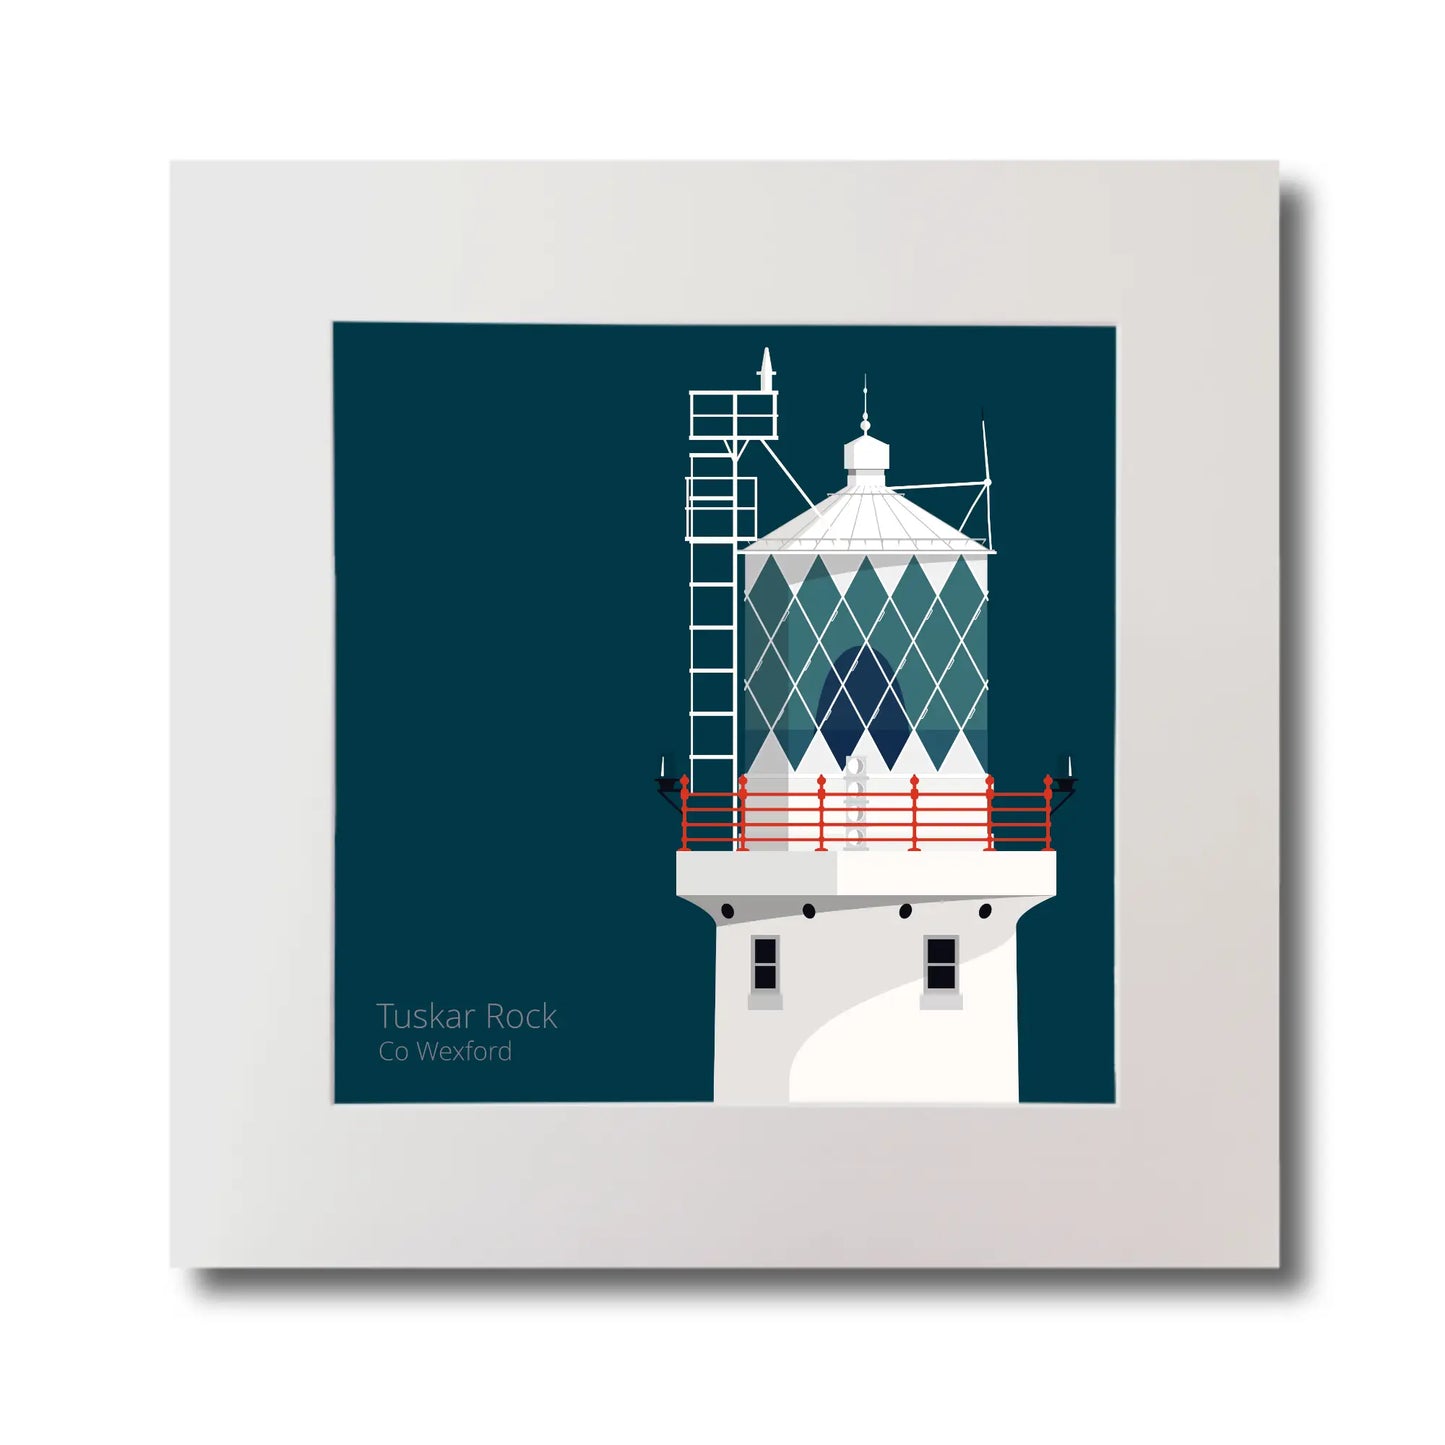 Illustration of Tuskar Rock lighthouse on a midnight blue background, mounted and measuring 30x30cm.